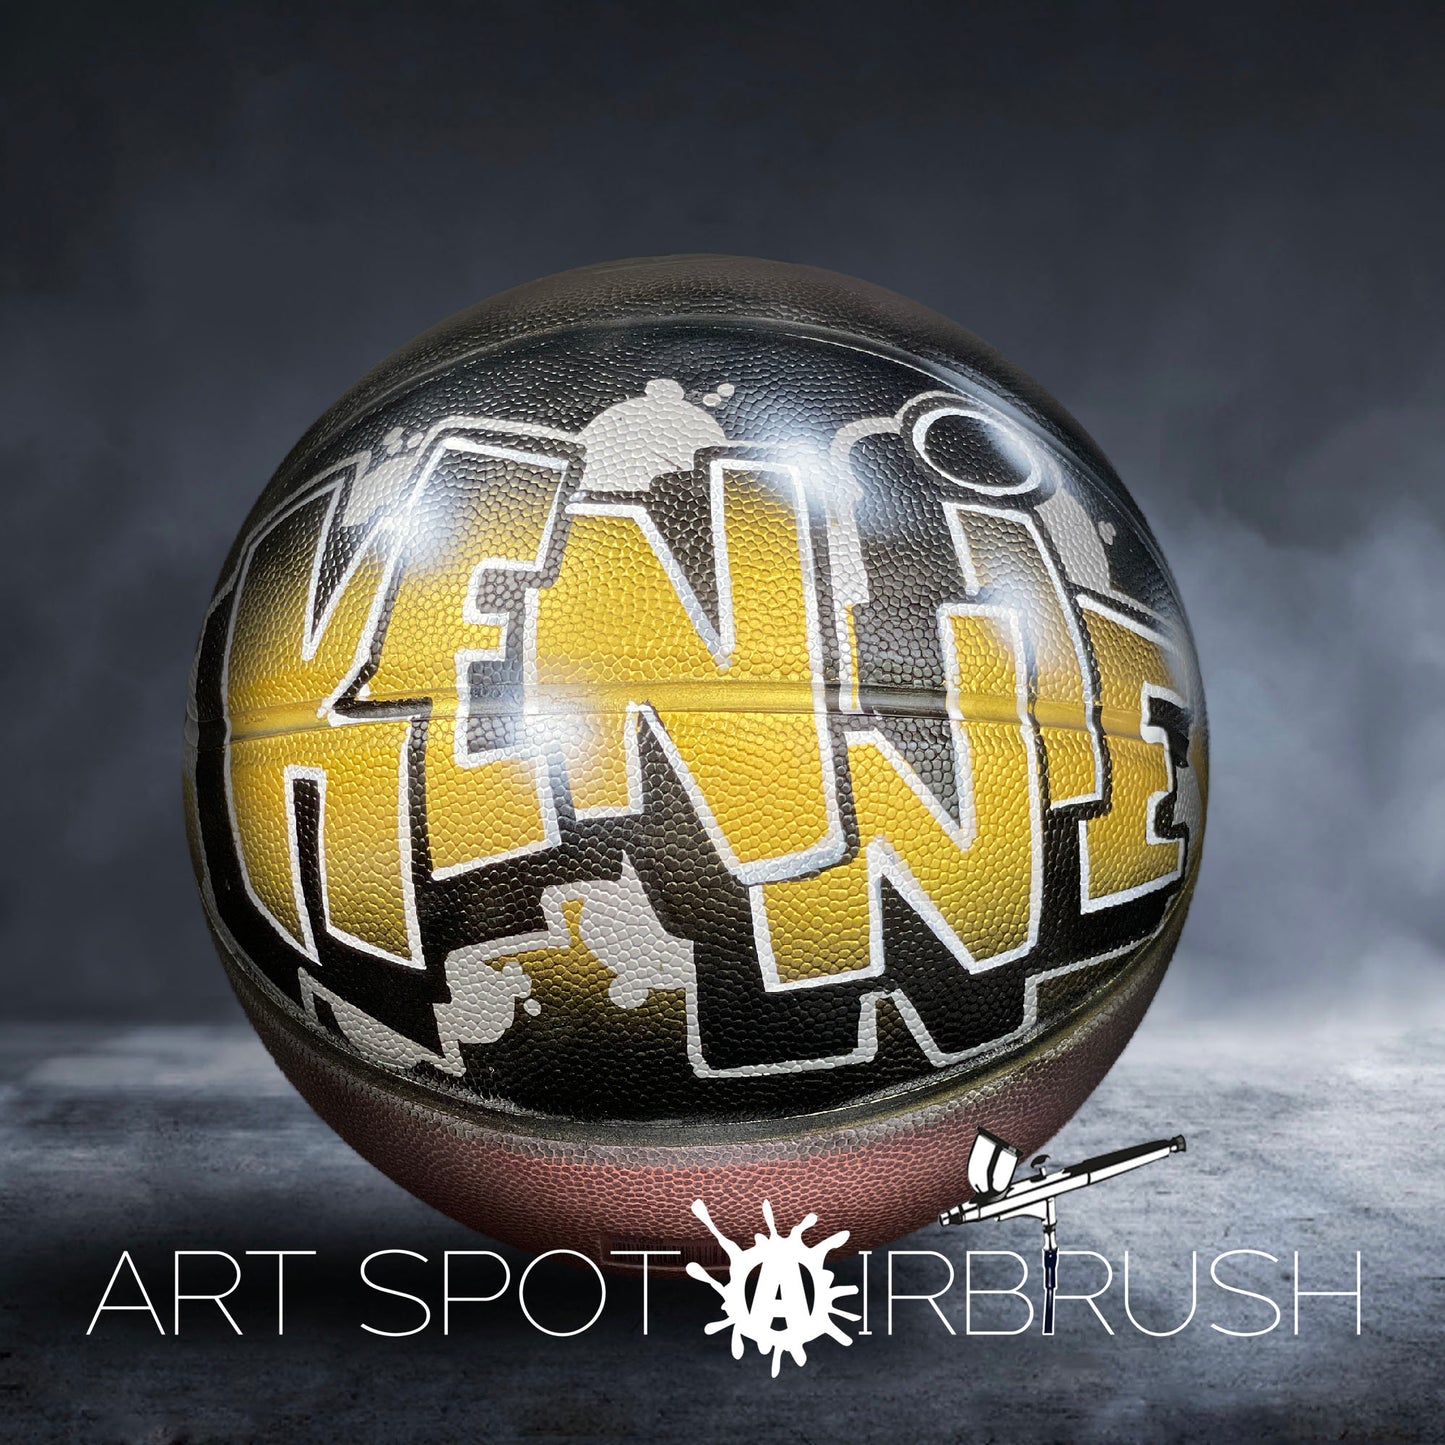 Personalized Basketball with Name in Graffiti